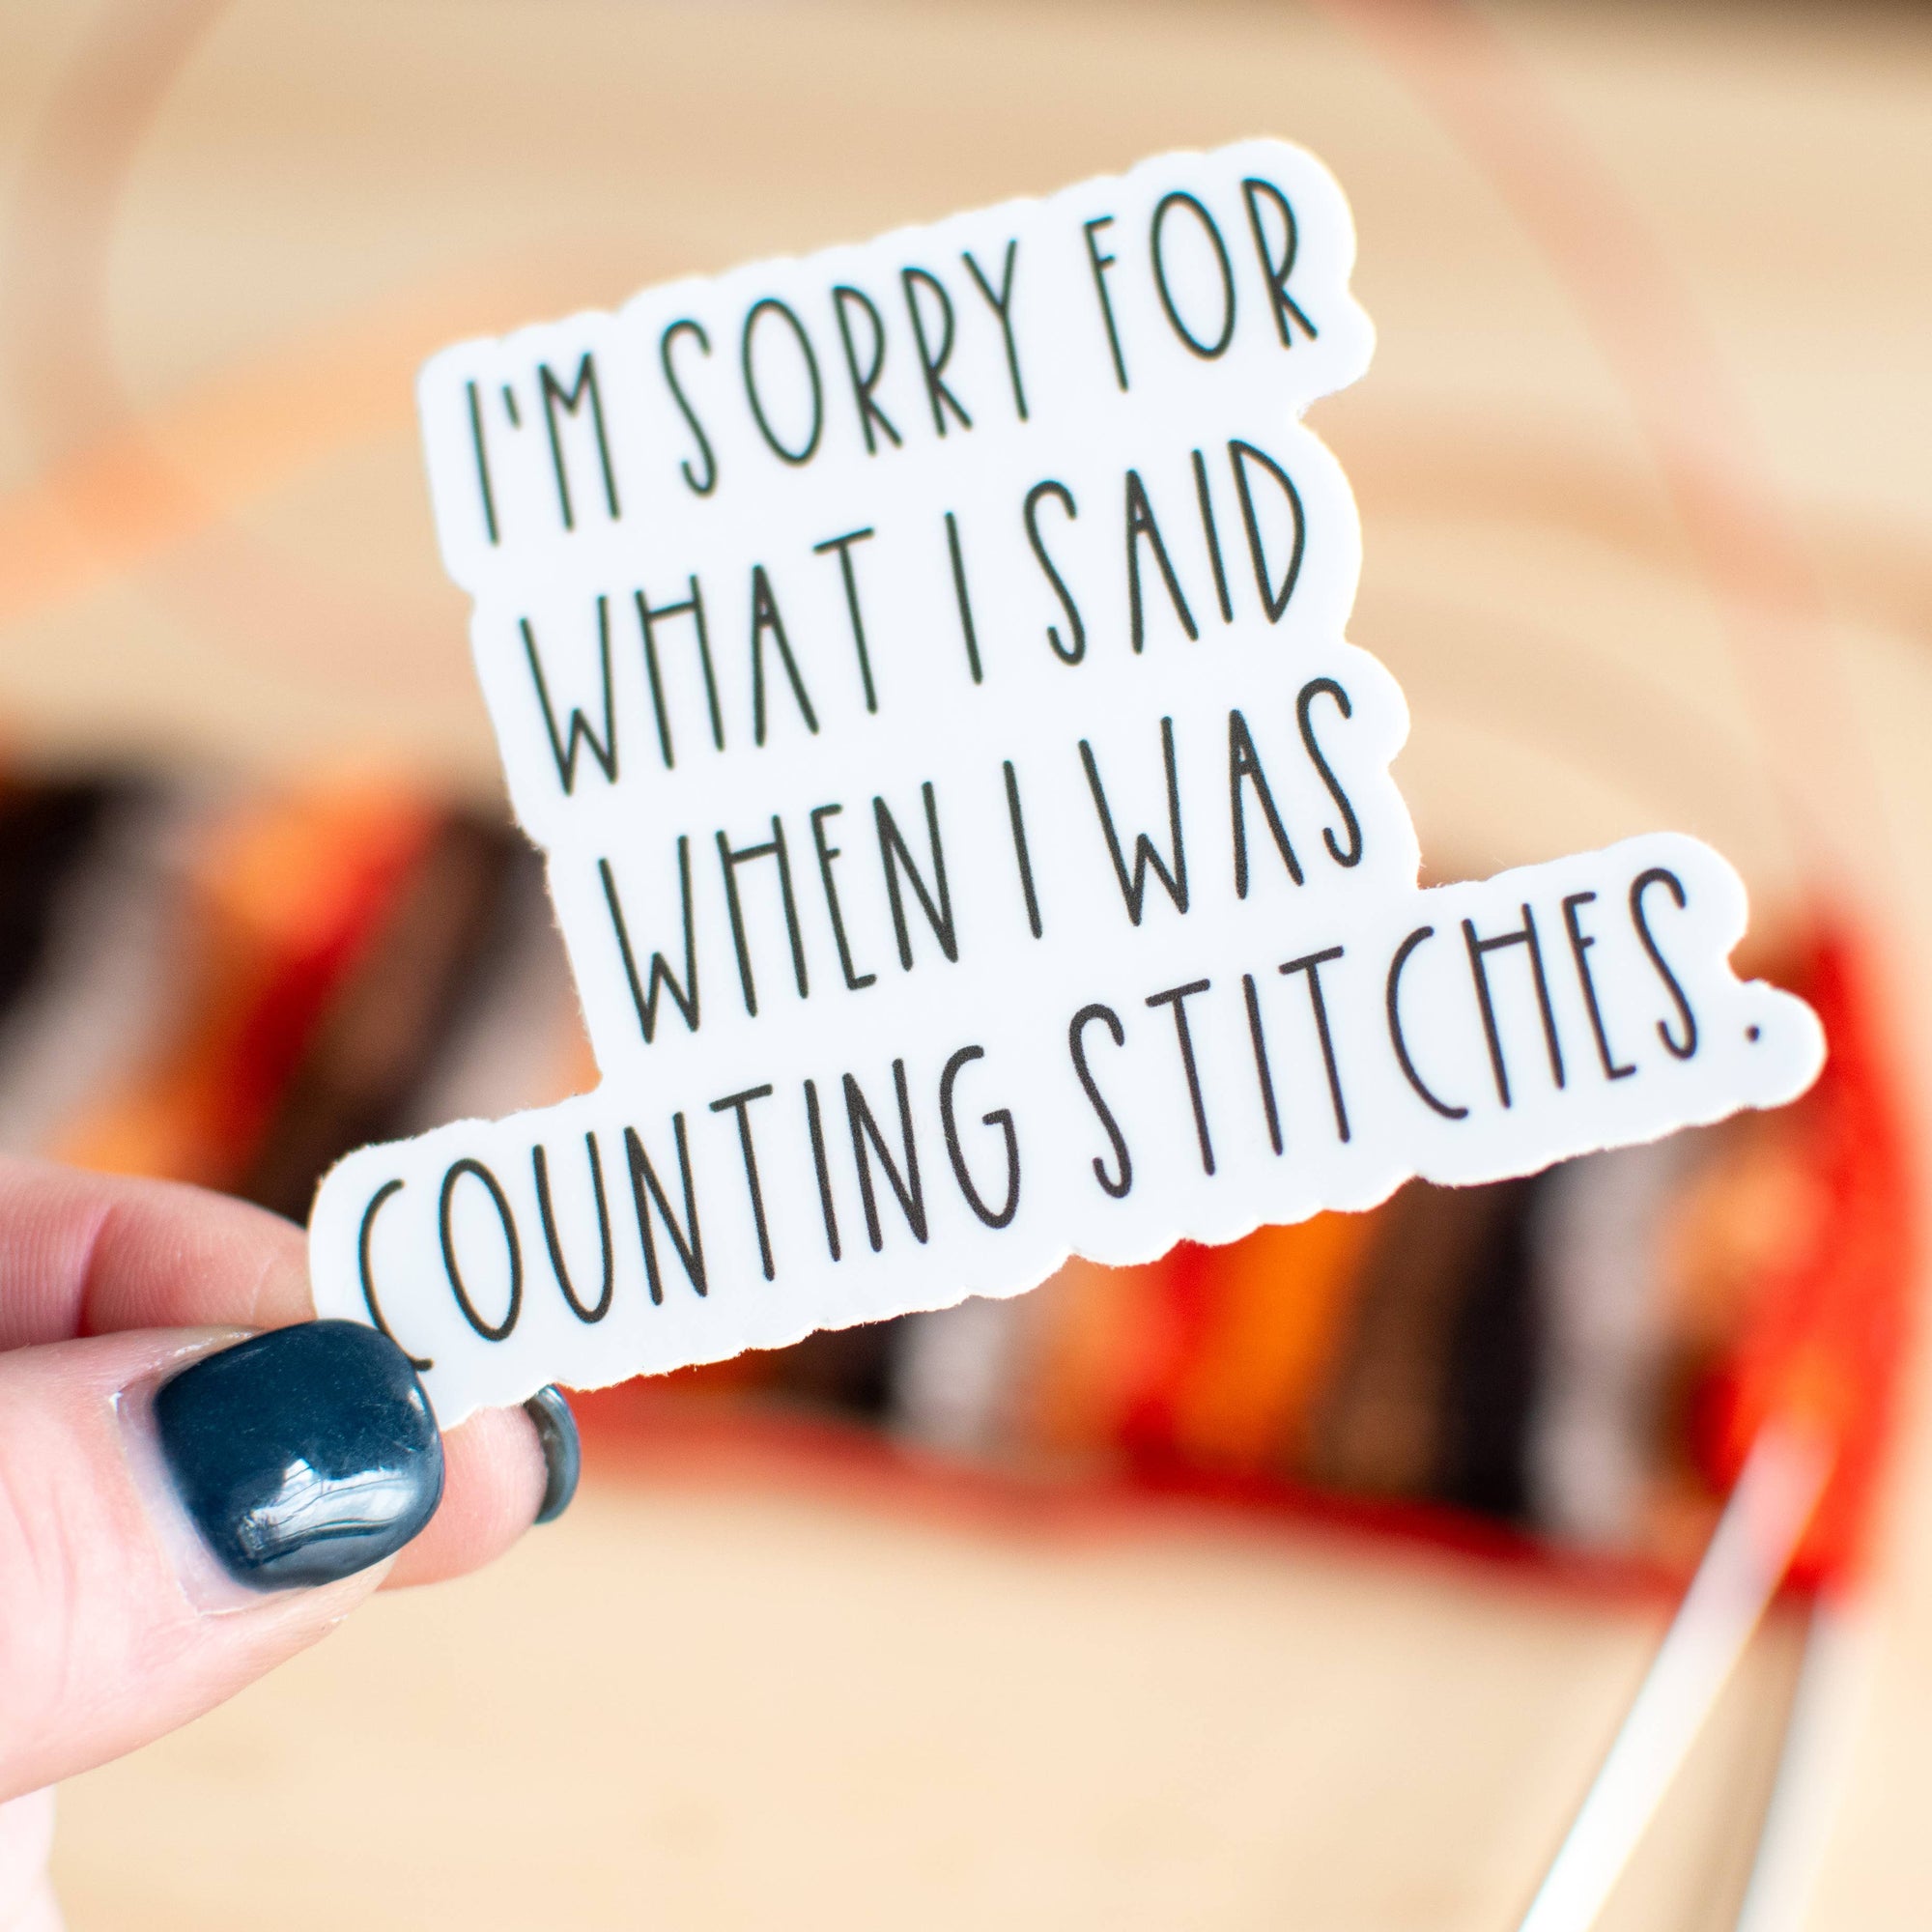 Sorry Sticker ... when i was counting stitches